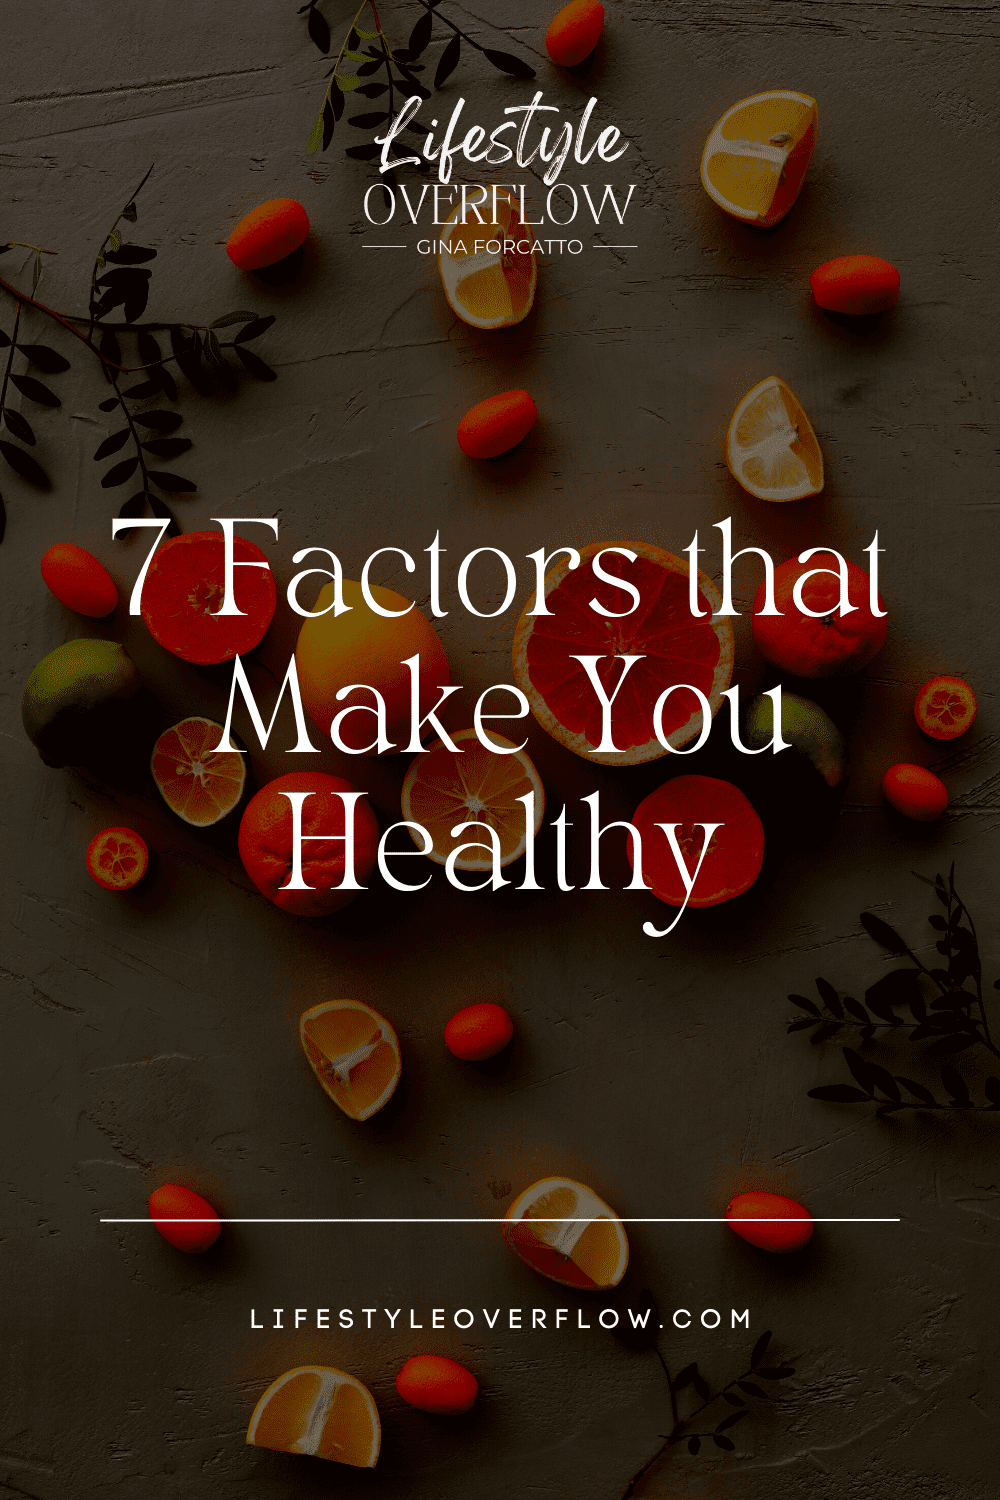 darkened photo graphic of veggies with text overlay: 7 factors that make you healthy